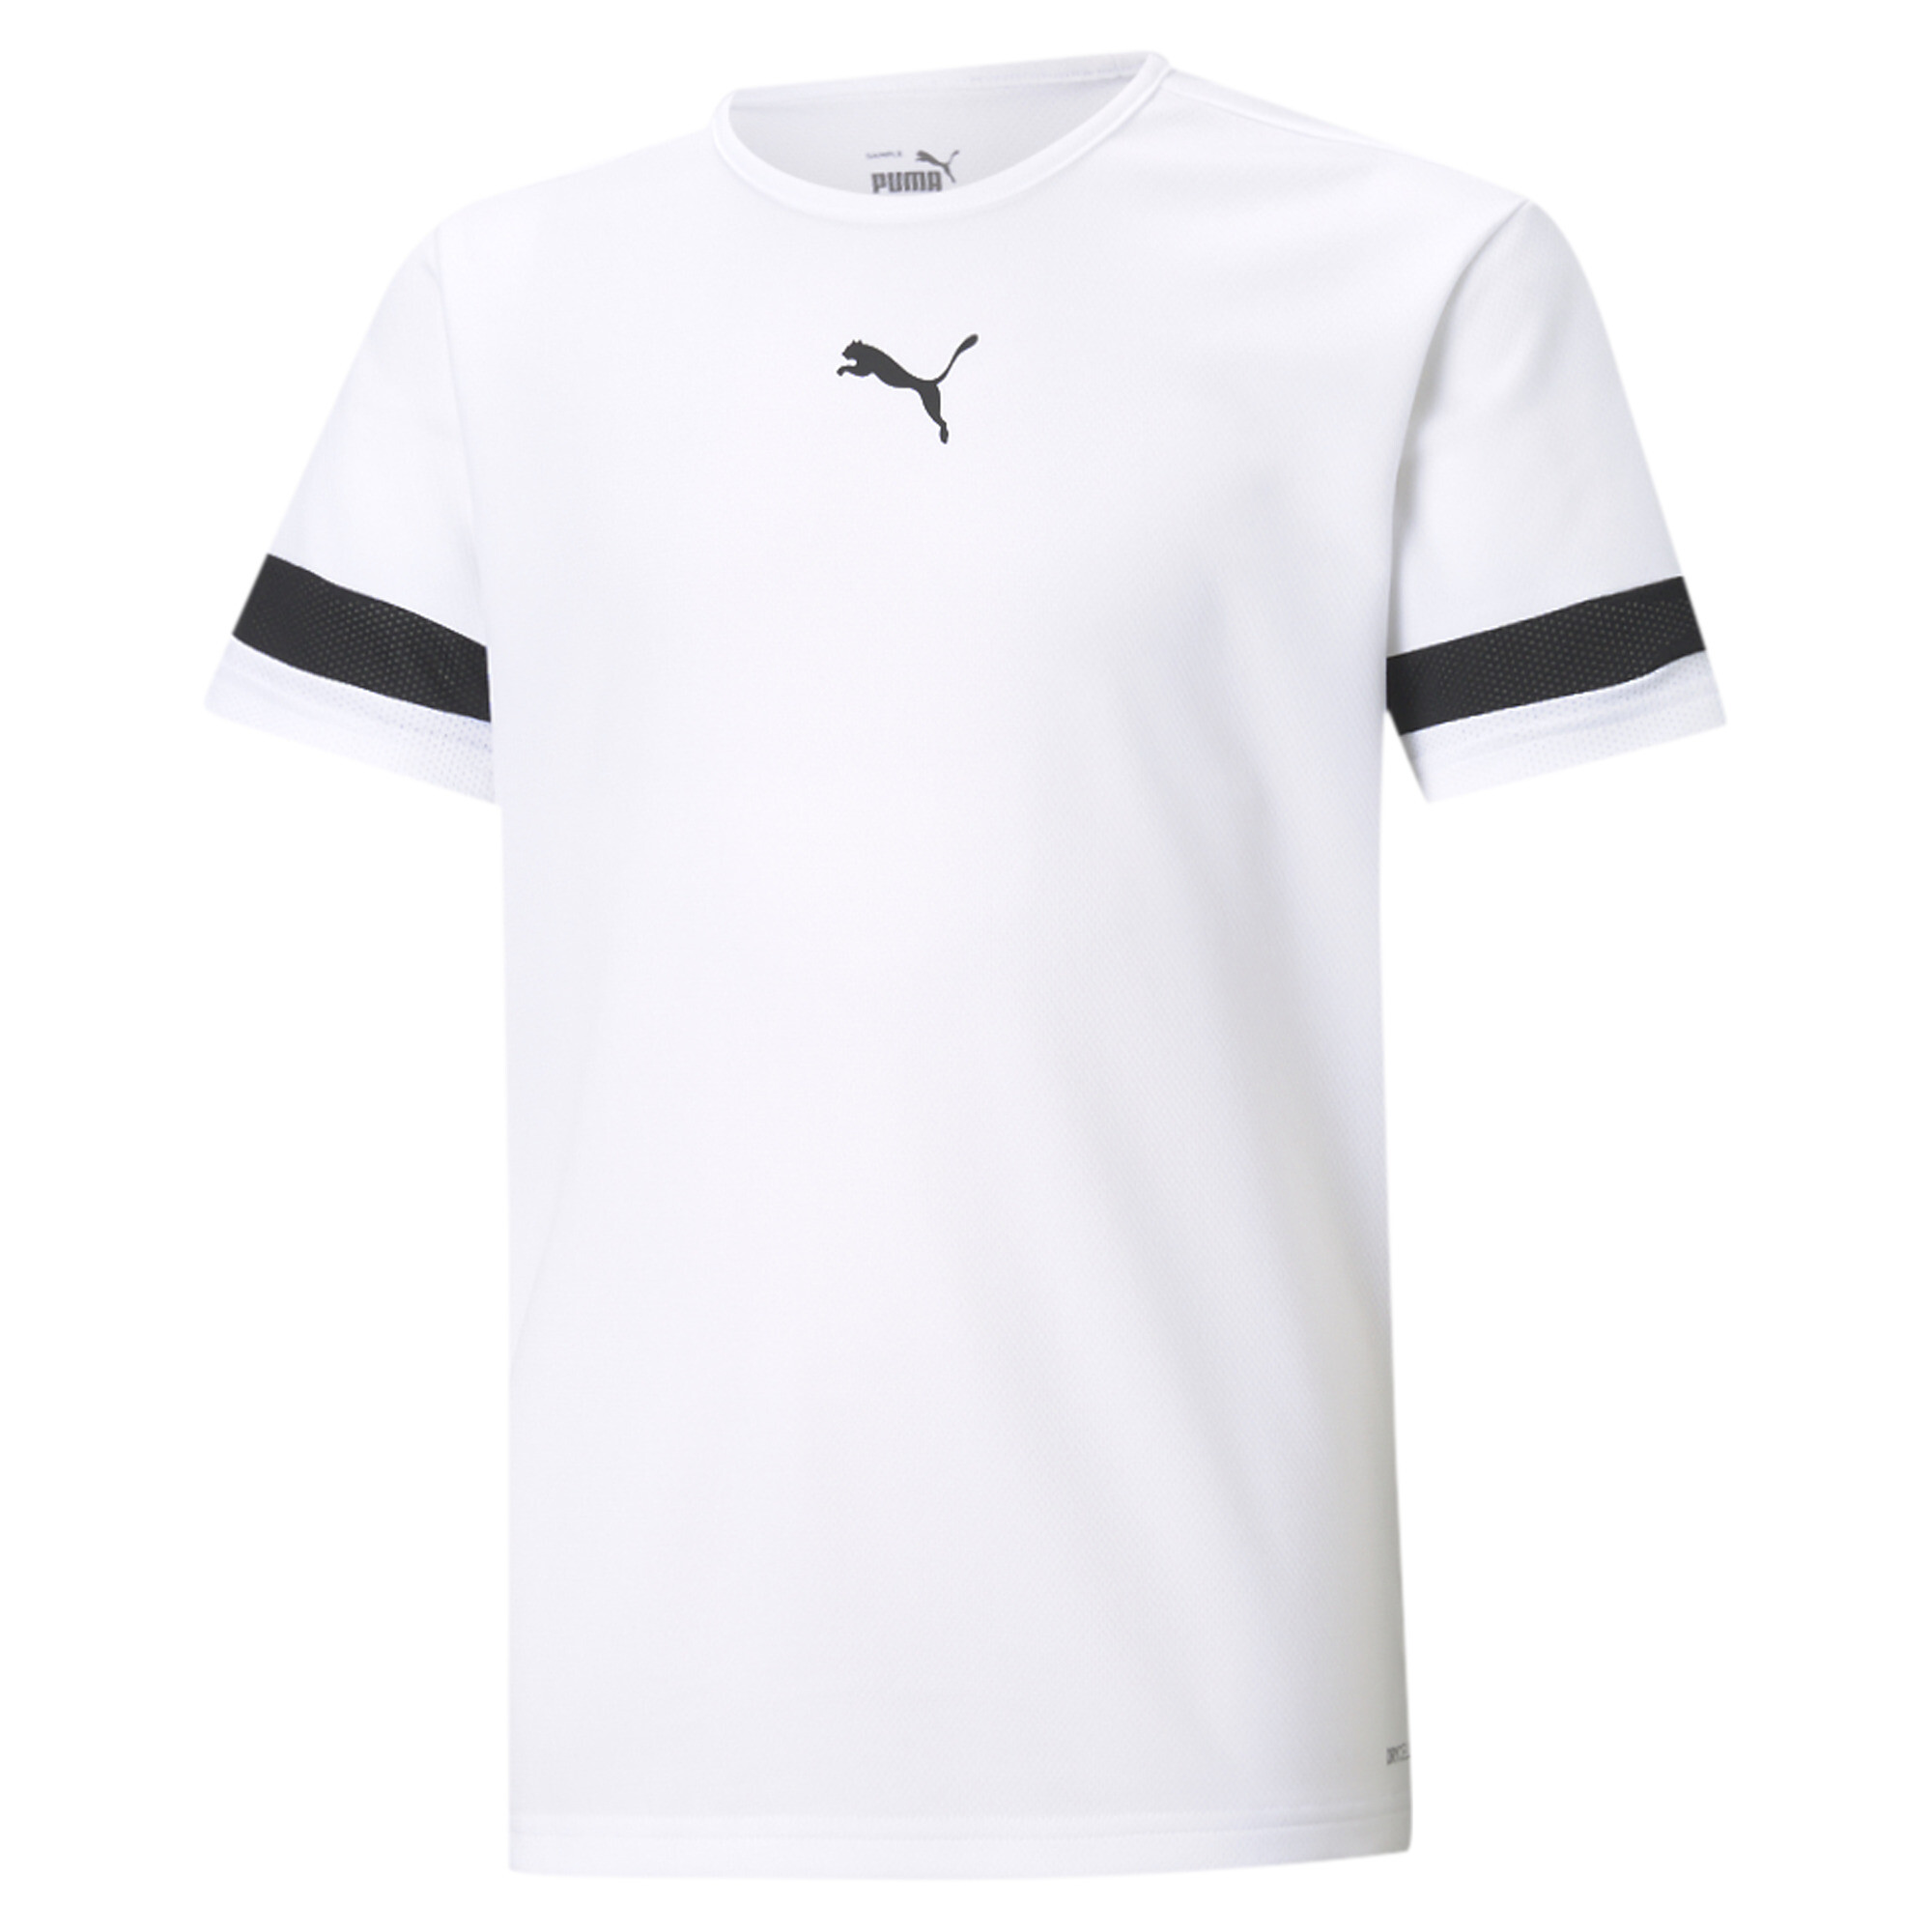 Puma Team RISE Youth Football Jersey, White, Size 3-4Y, Clothing